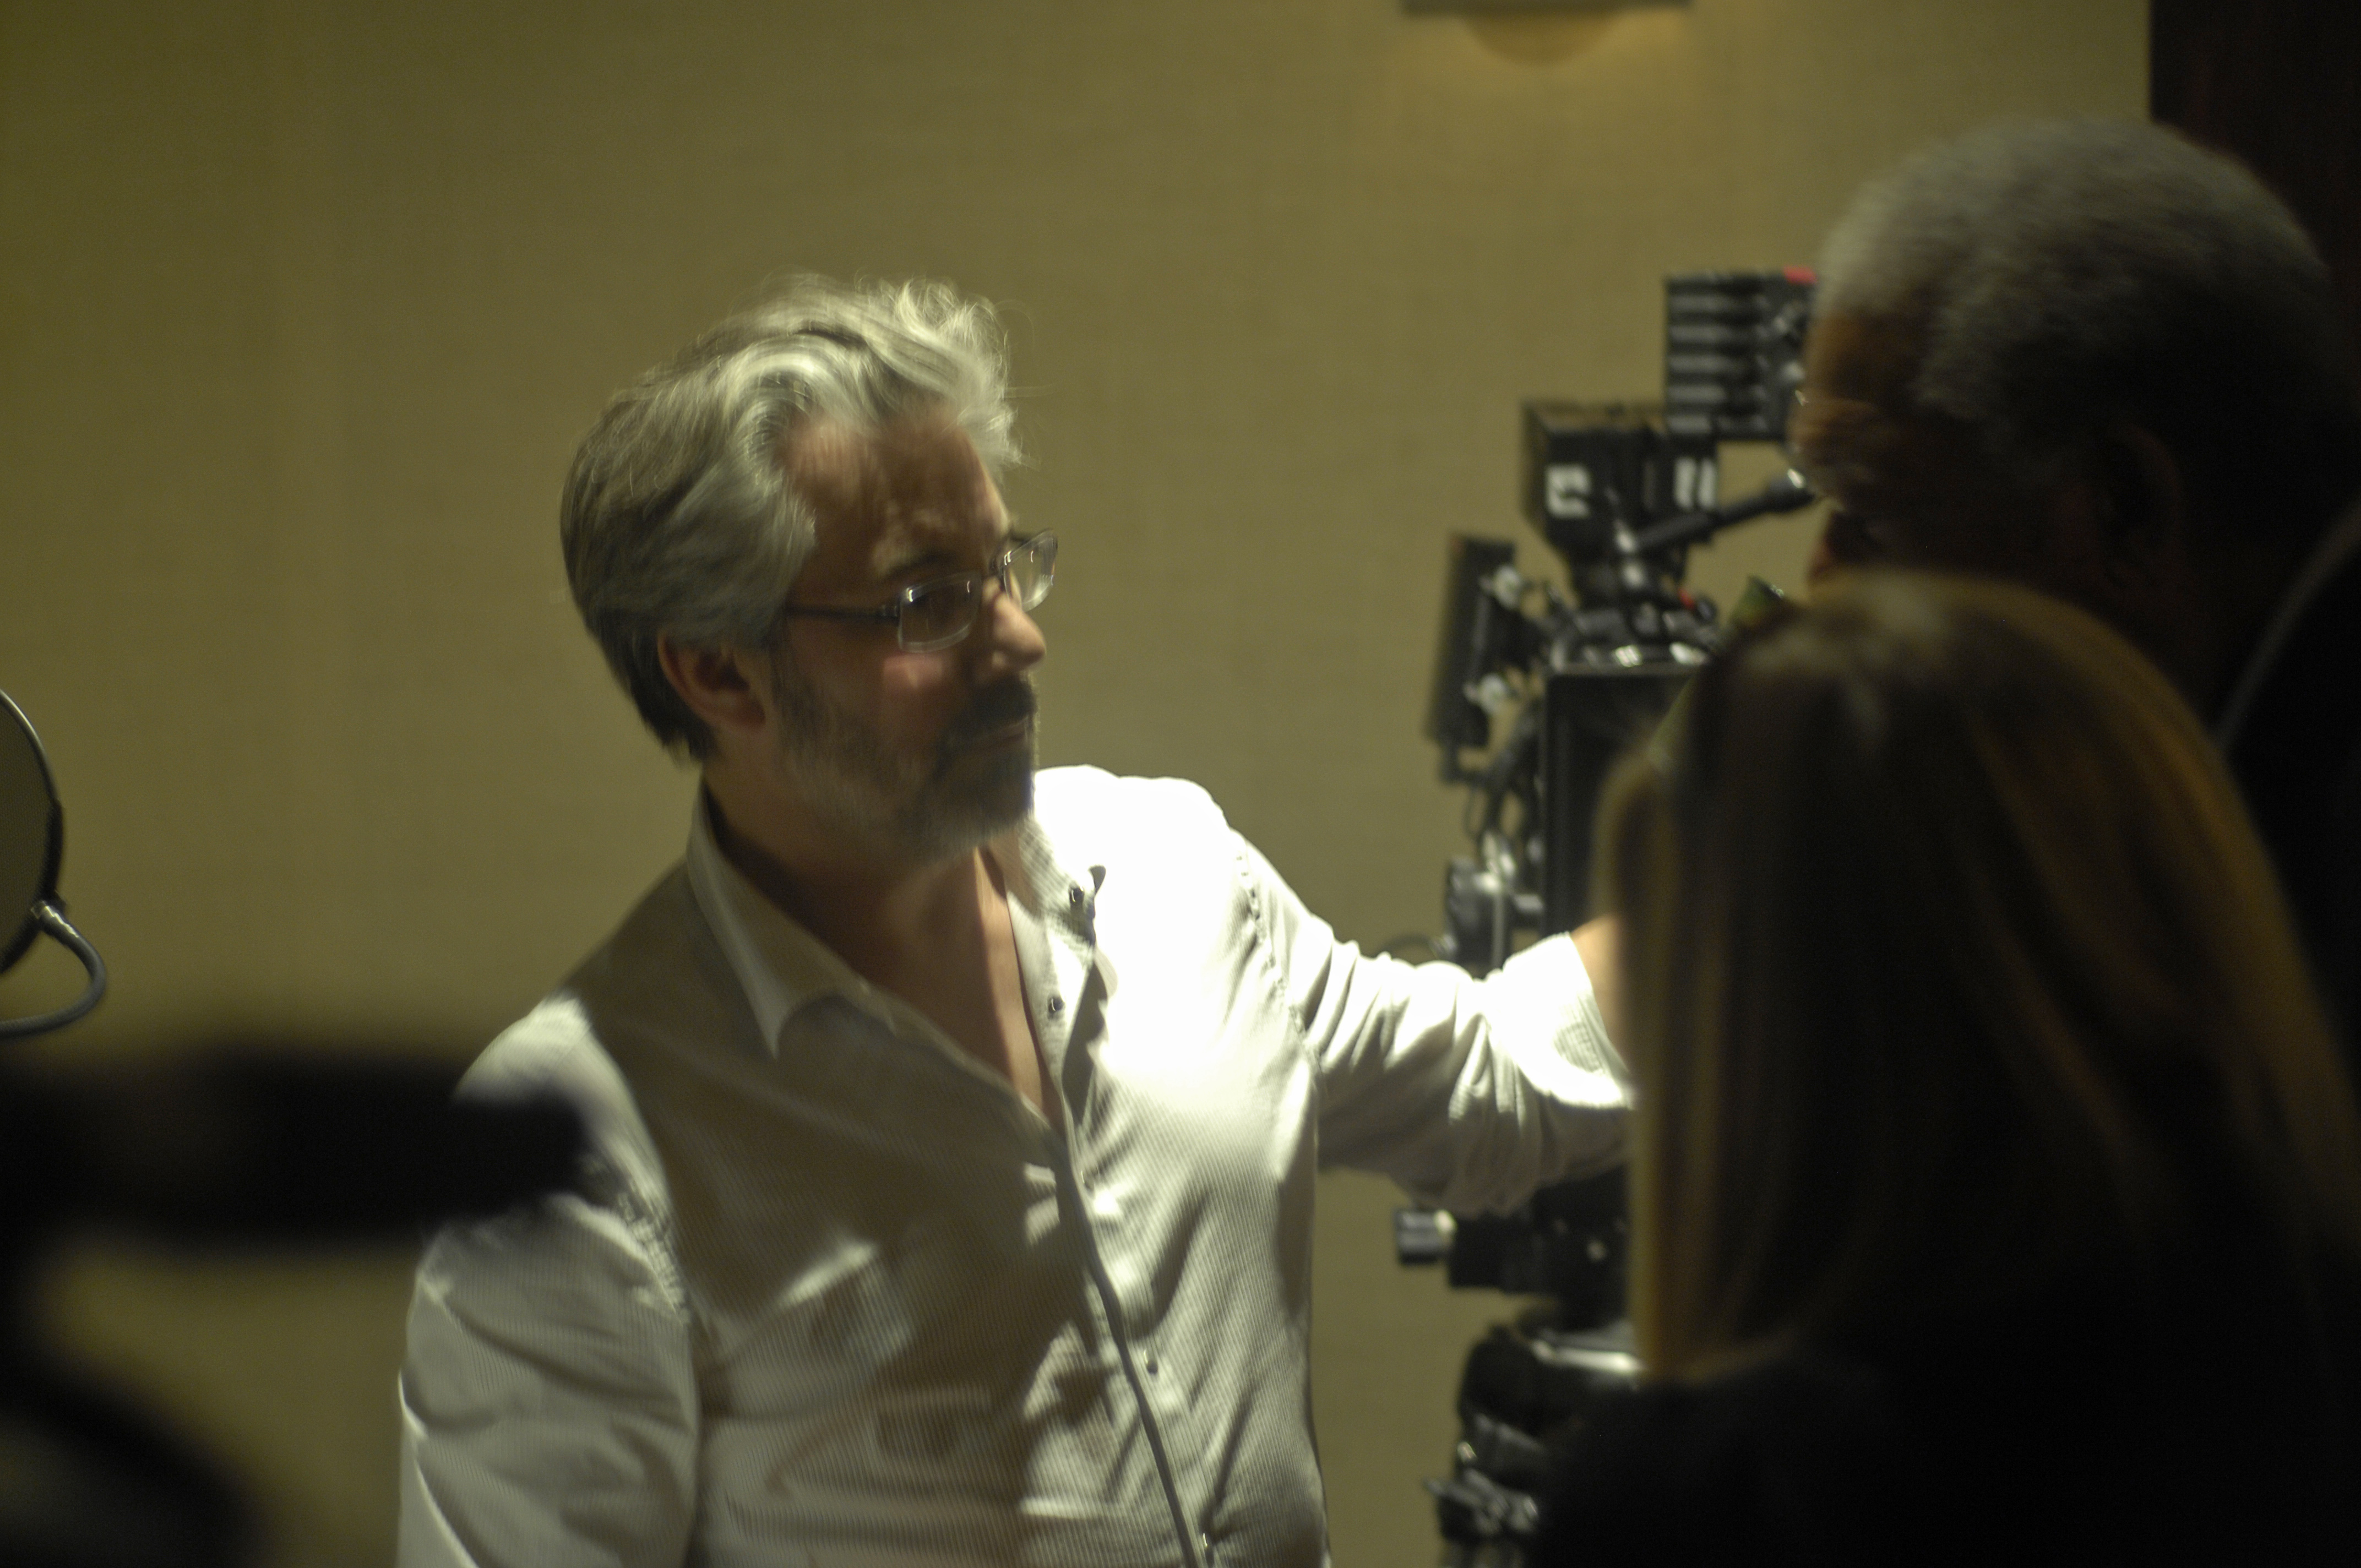 Paul Lazarus working with Morgan Freeman on video for FIRST robotics